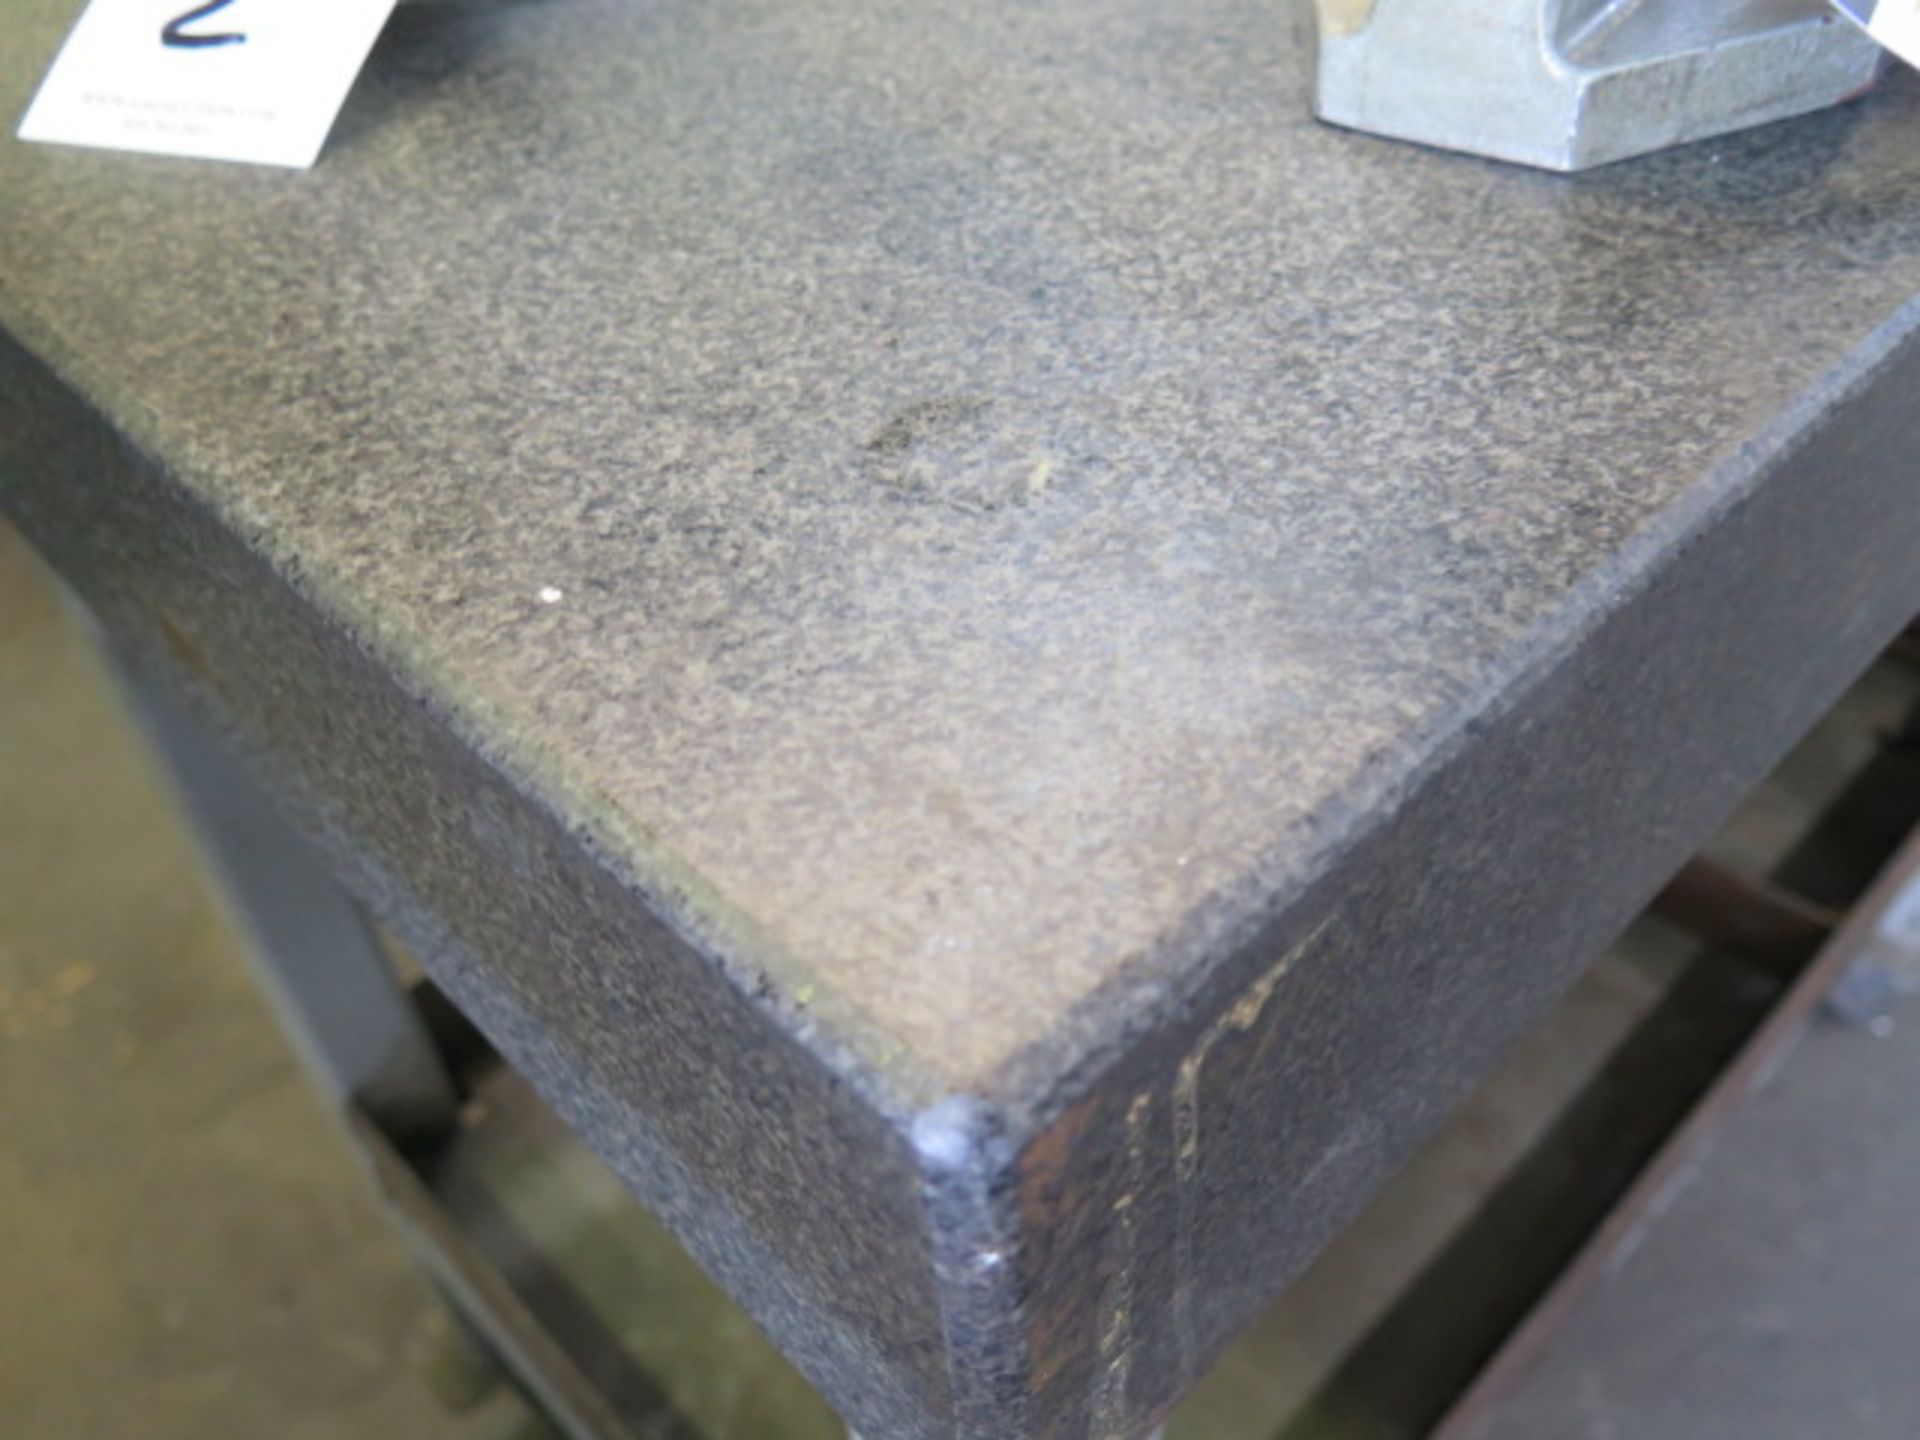 24” x 36” x 5” Granite Surface Plate w/ Roll Stand (SOLD AS-IS - NO WARRANTY) - Image 3 of 5